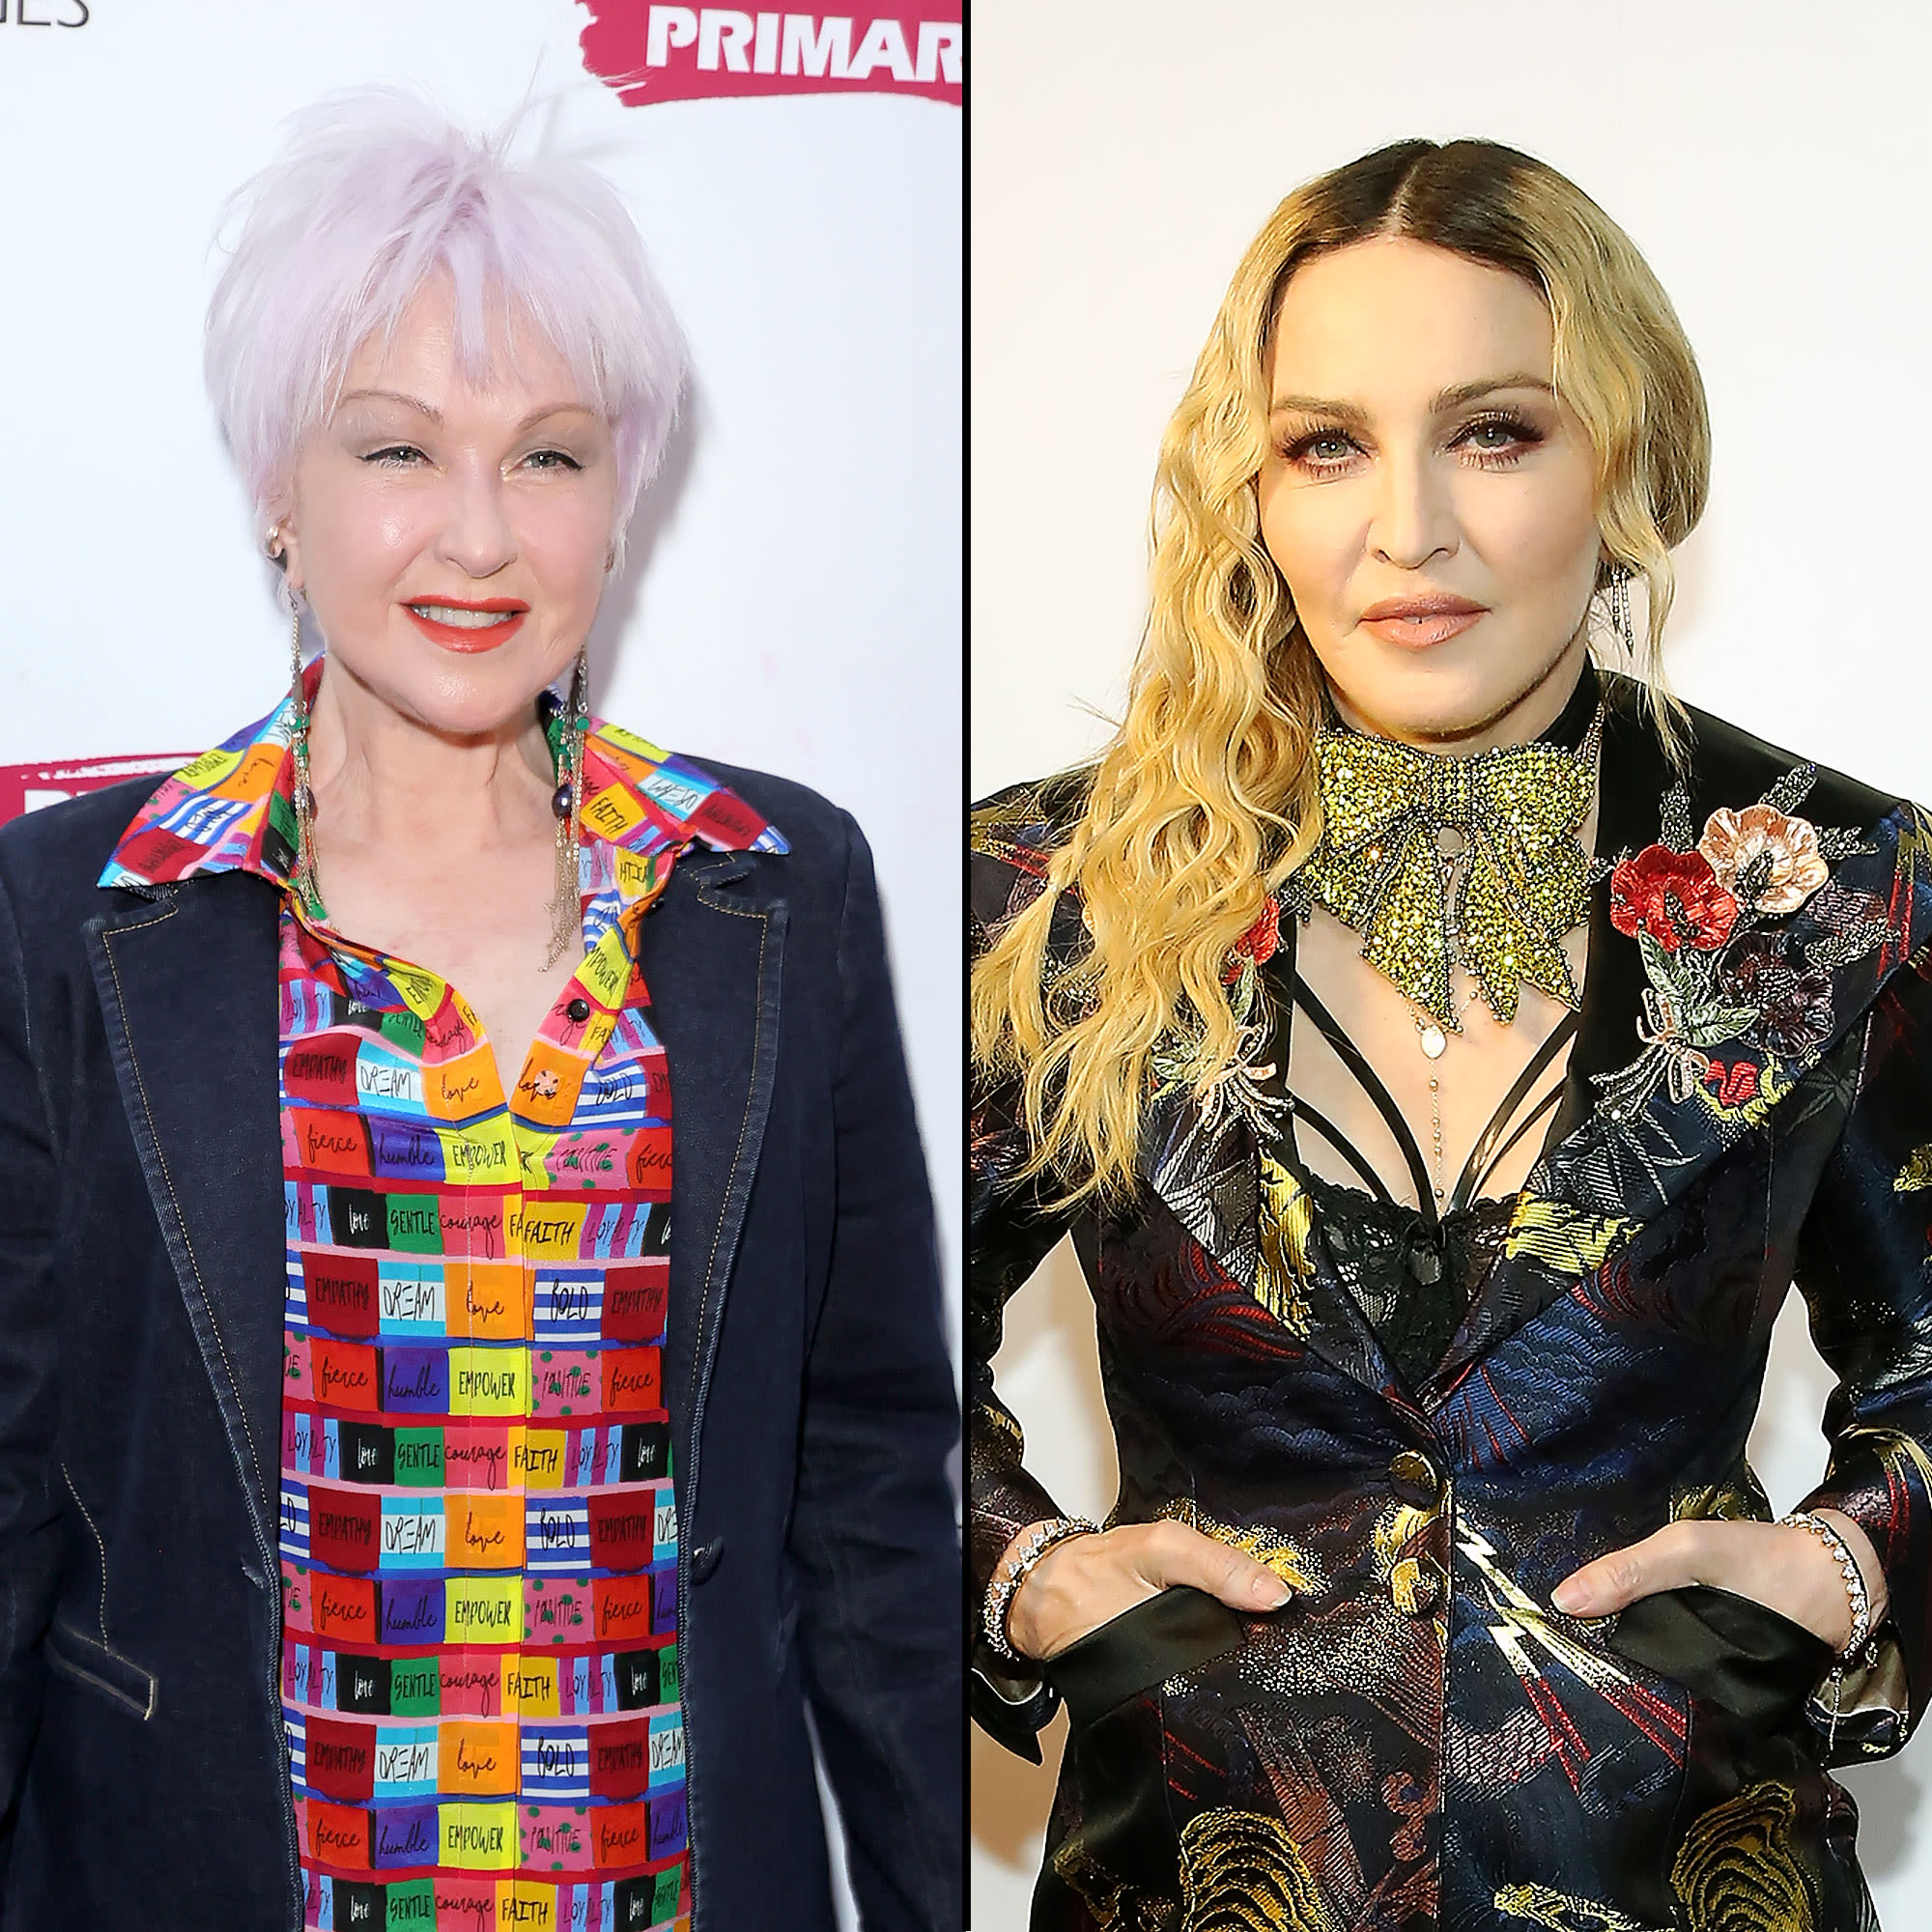 Cyndi Lauper Wishes She and Madonna Were Friends Instead of Pitted Against Each Other in the ’80s